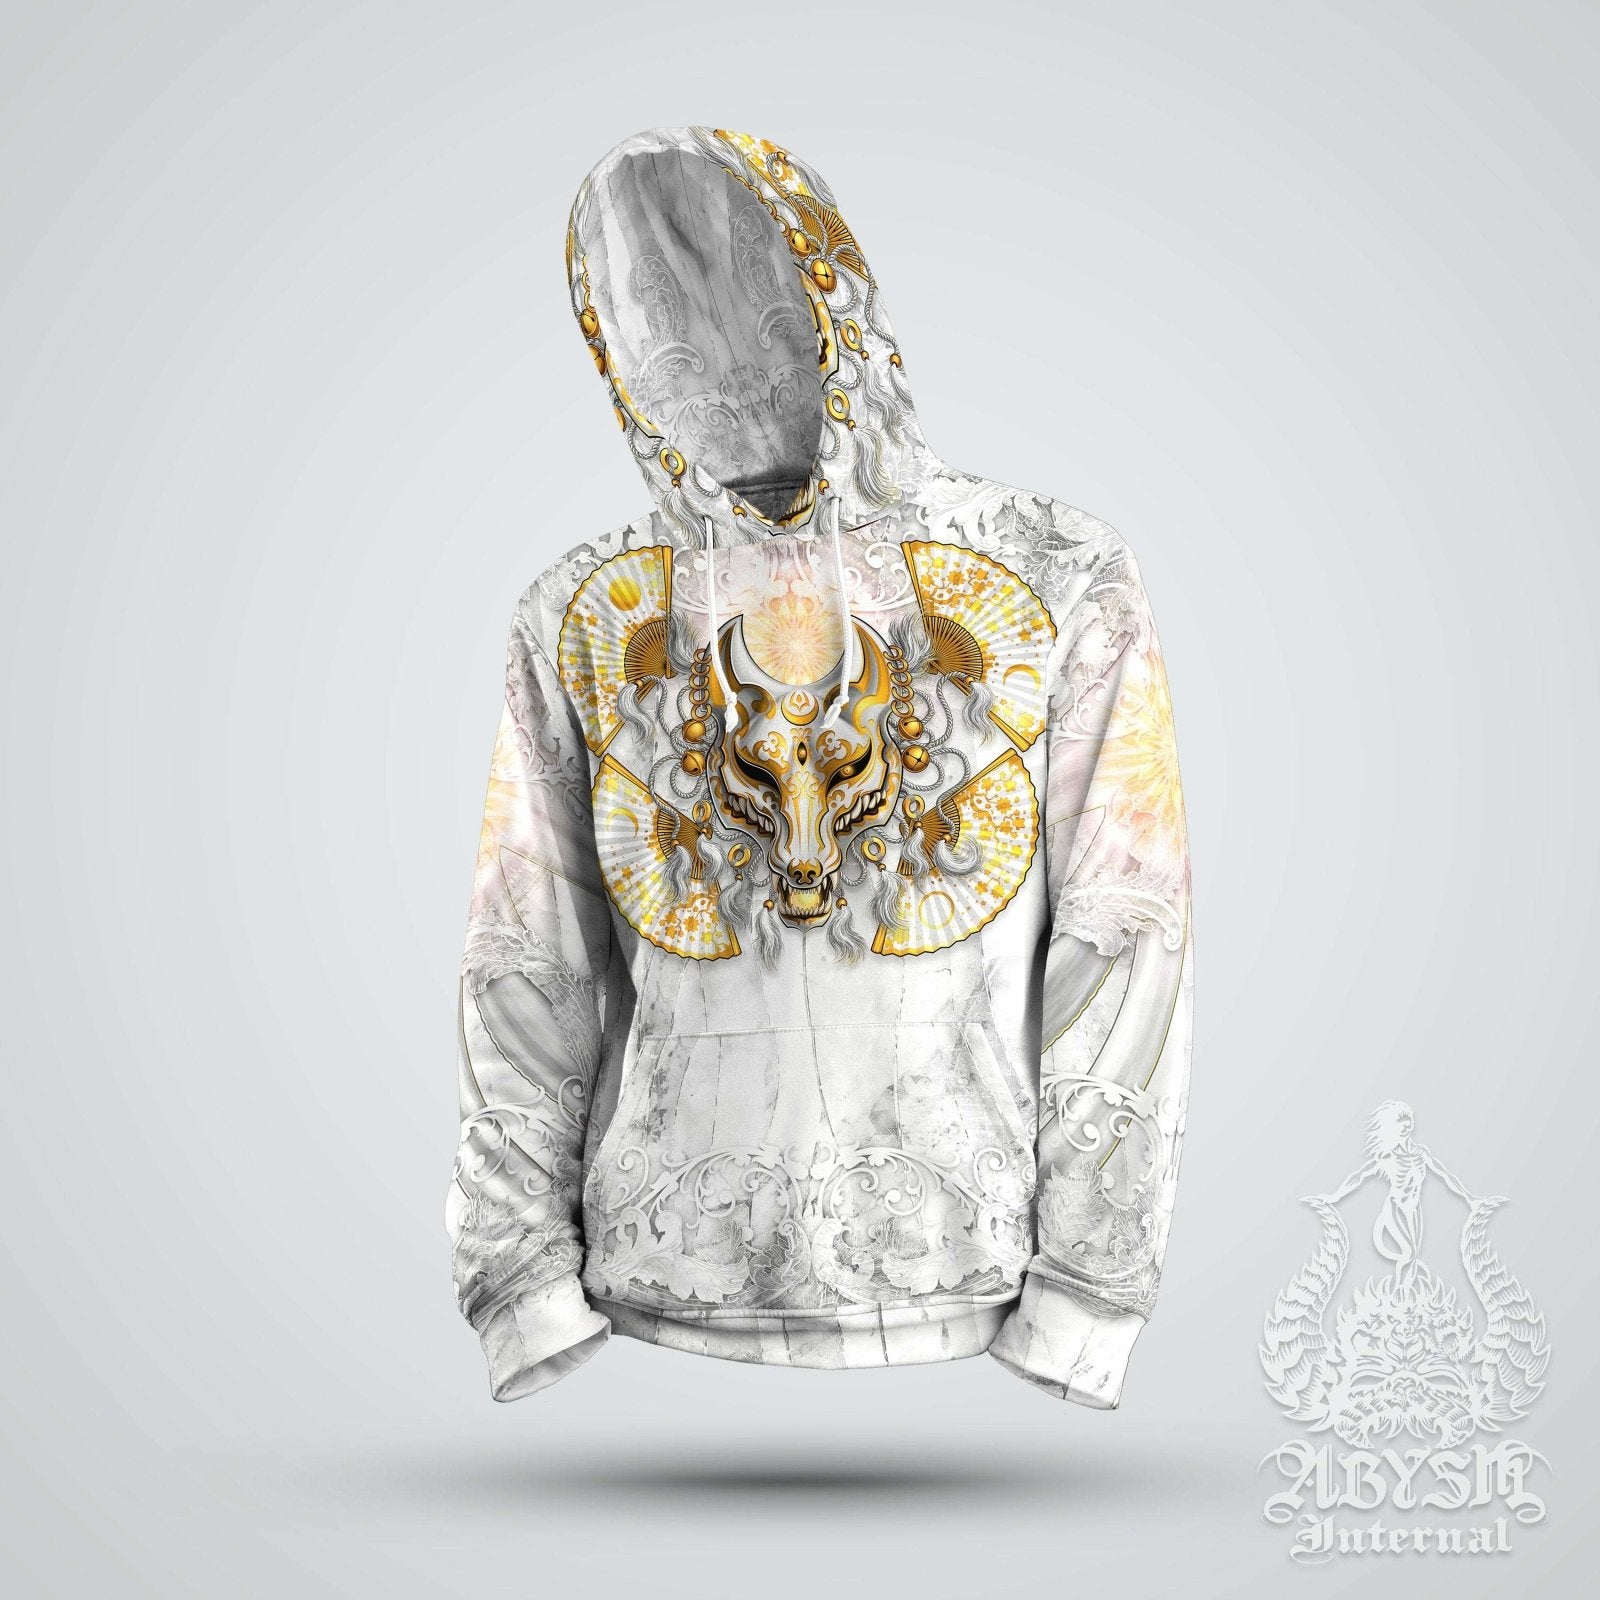 Anime Hoodie, Street Outfit, Japanese Streetwear, Gamer Apparel, Alternative Clothing, Unisex - Fox or Kitsune Mask, Gold and White - Abysm Internal